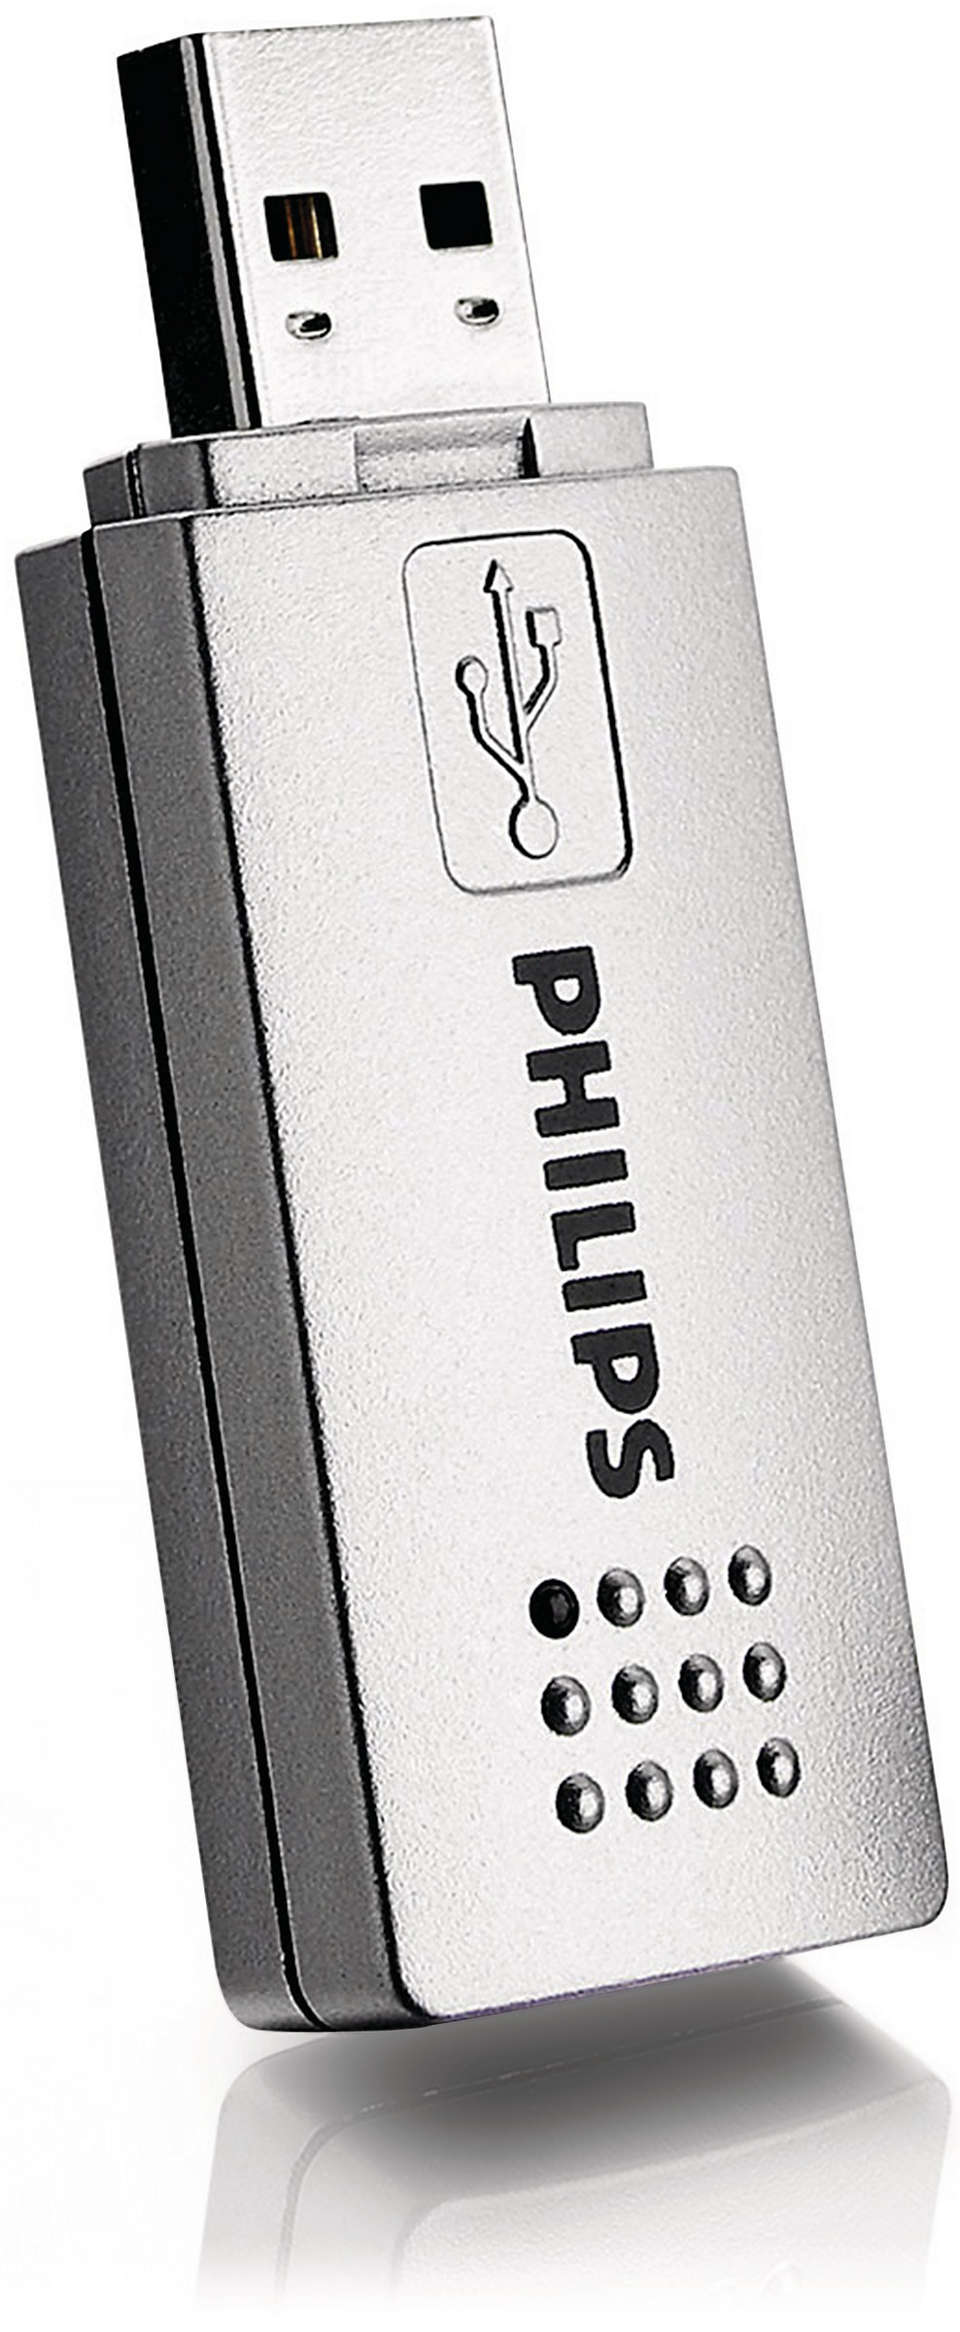 Designed by installers, made by Philips